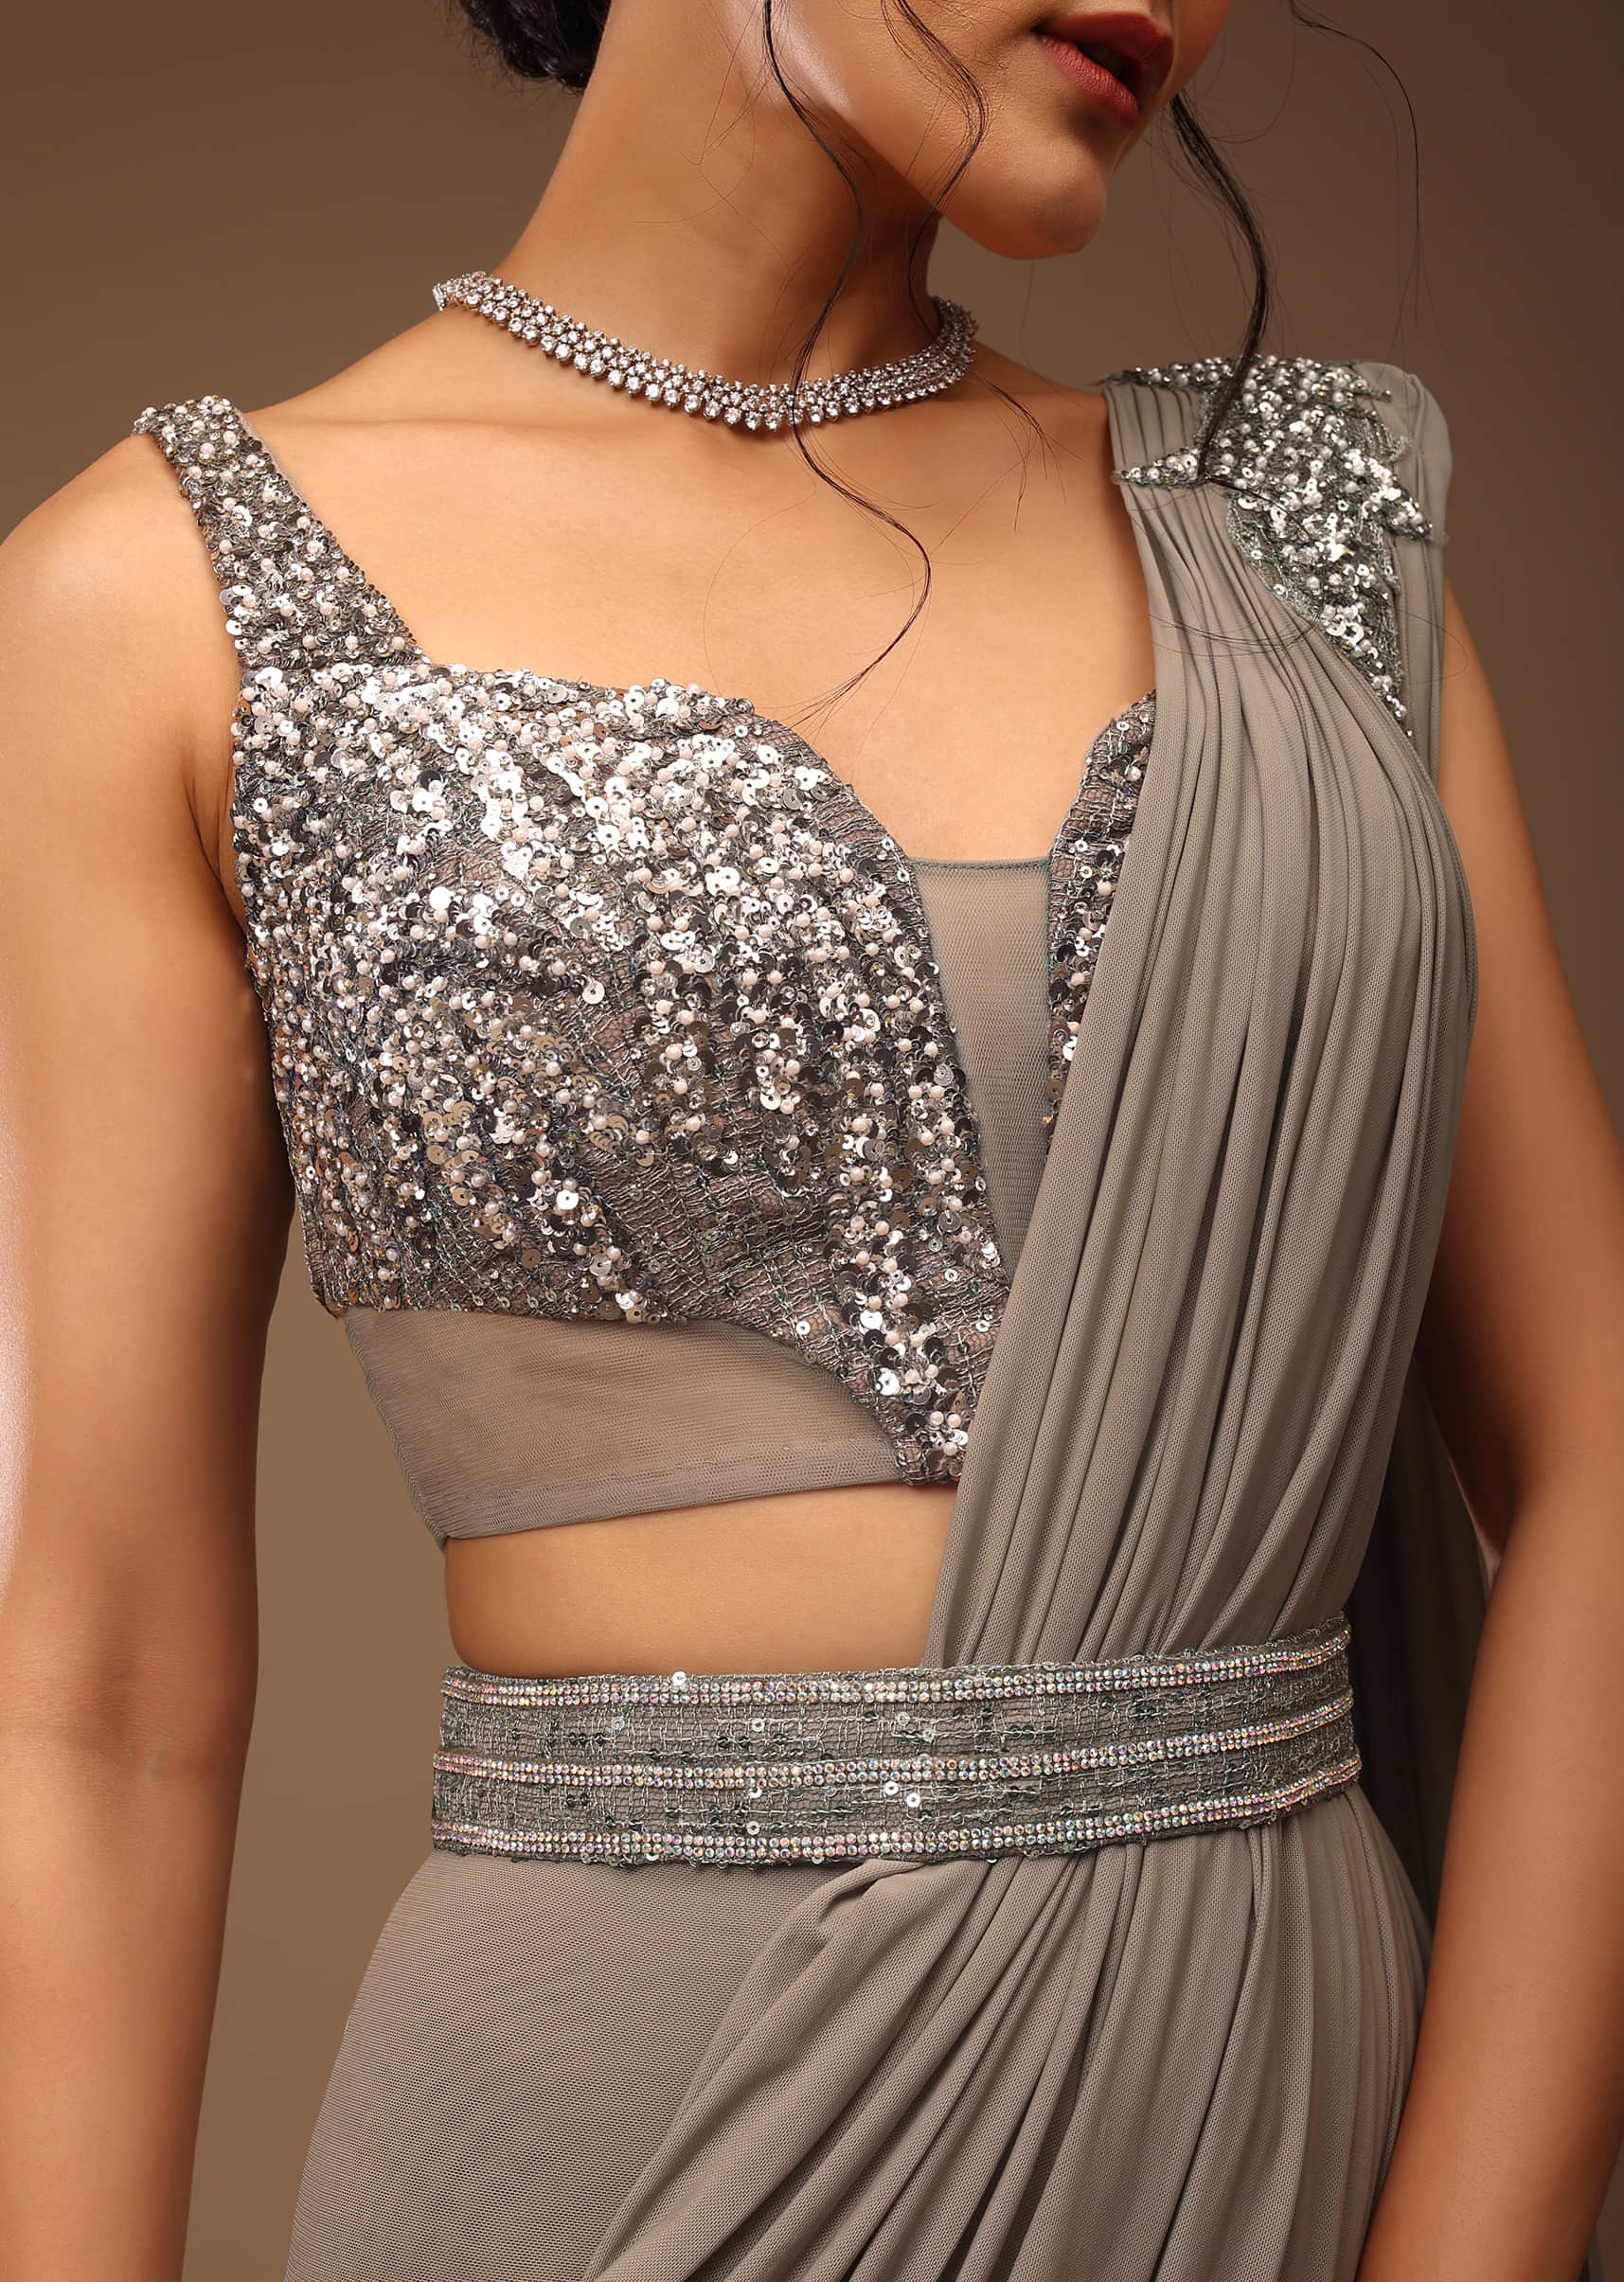 Flint Grey Ready-Pleated Saree With A Crop Top Embellished In Sequins With A Corset Neckline